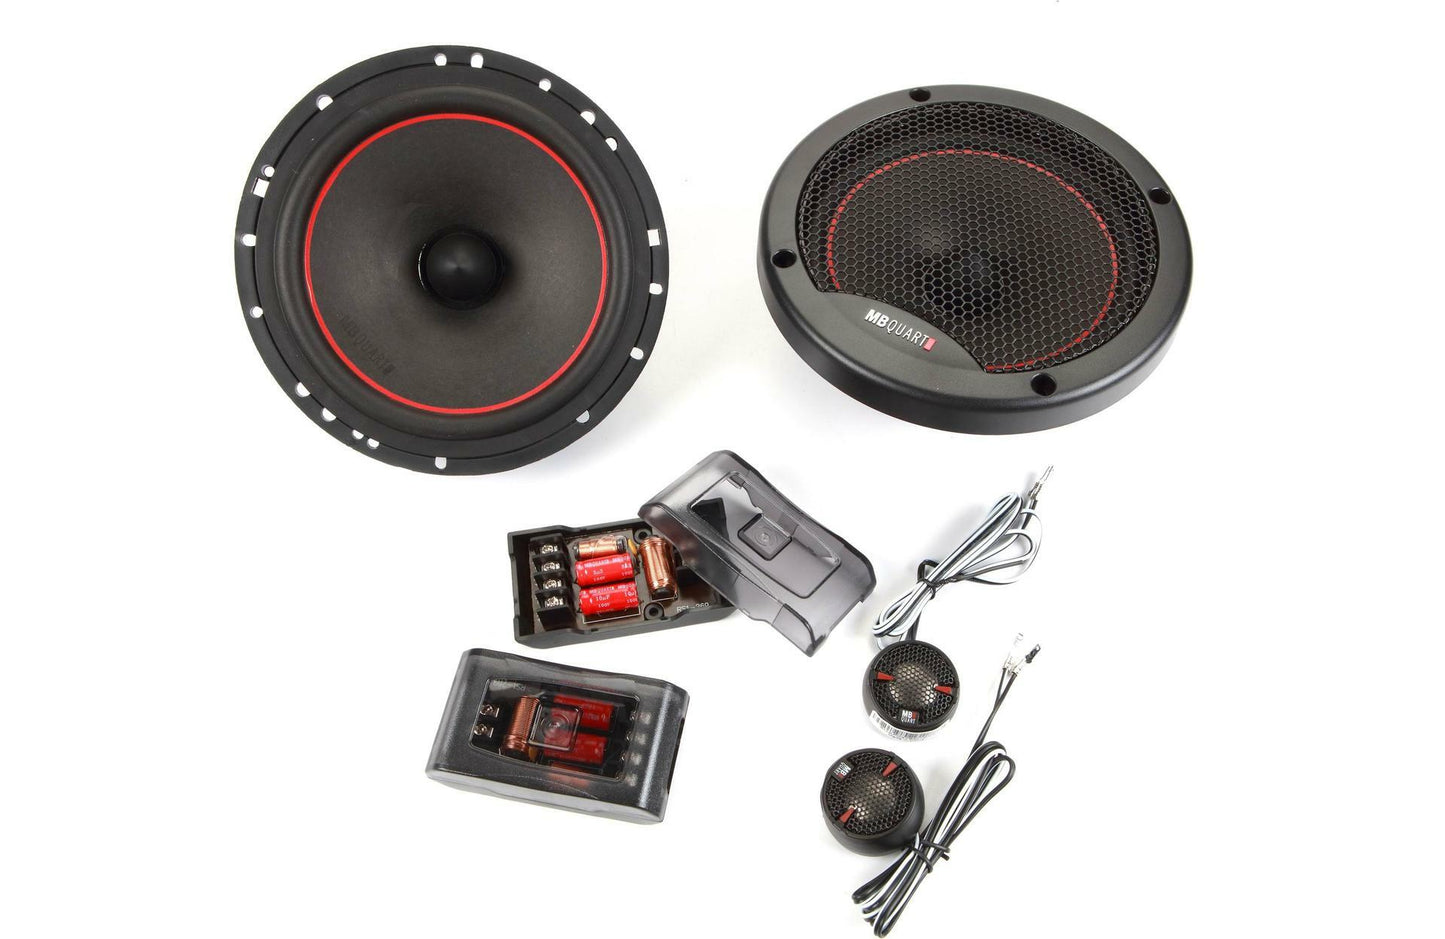 MB Quart RS1-216 Reference Series 6.5" Component Speaker System